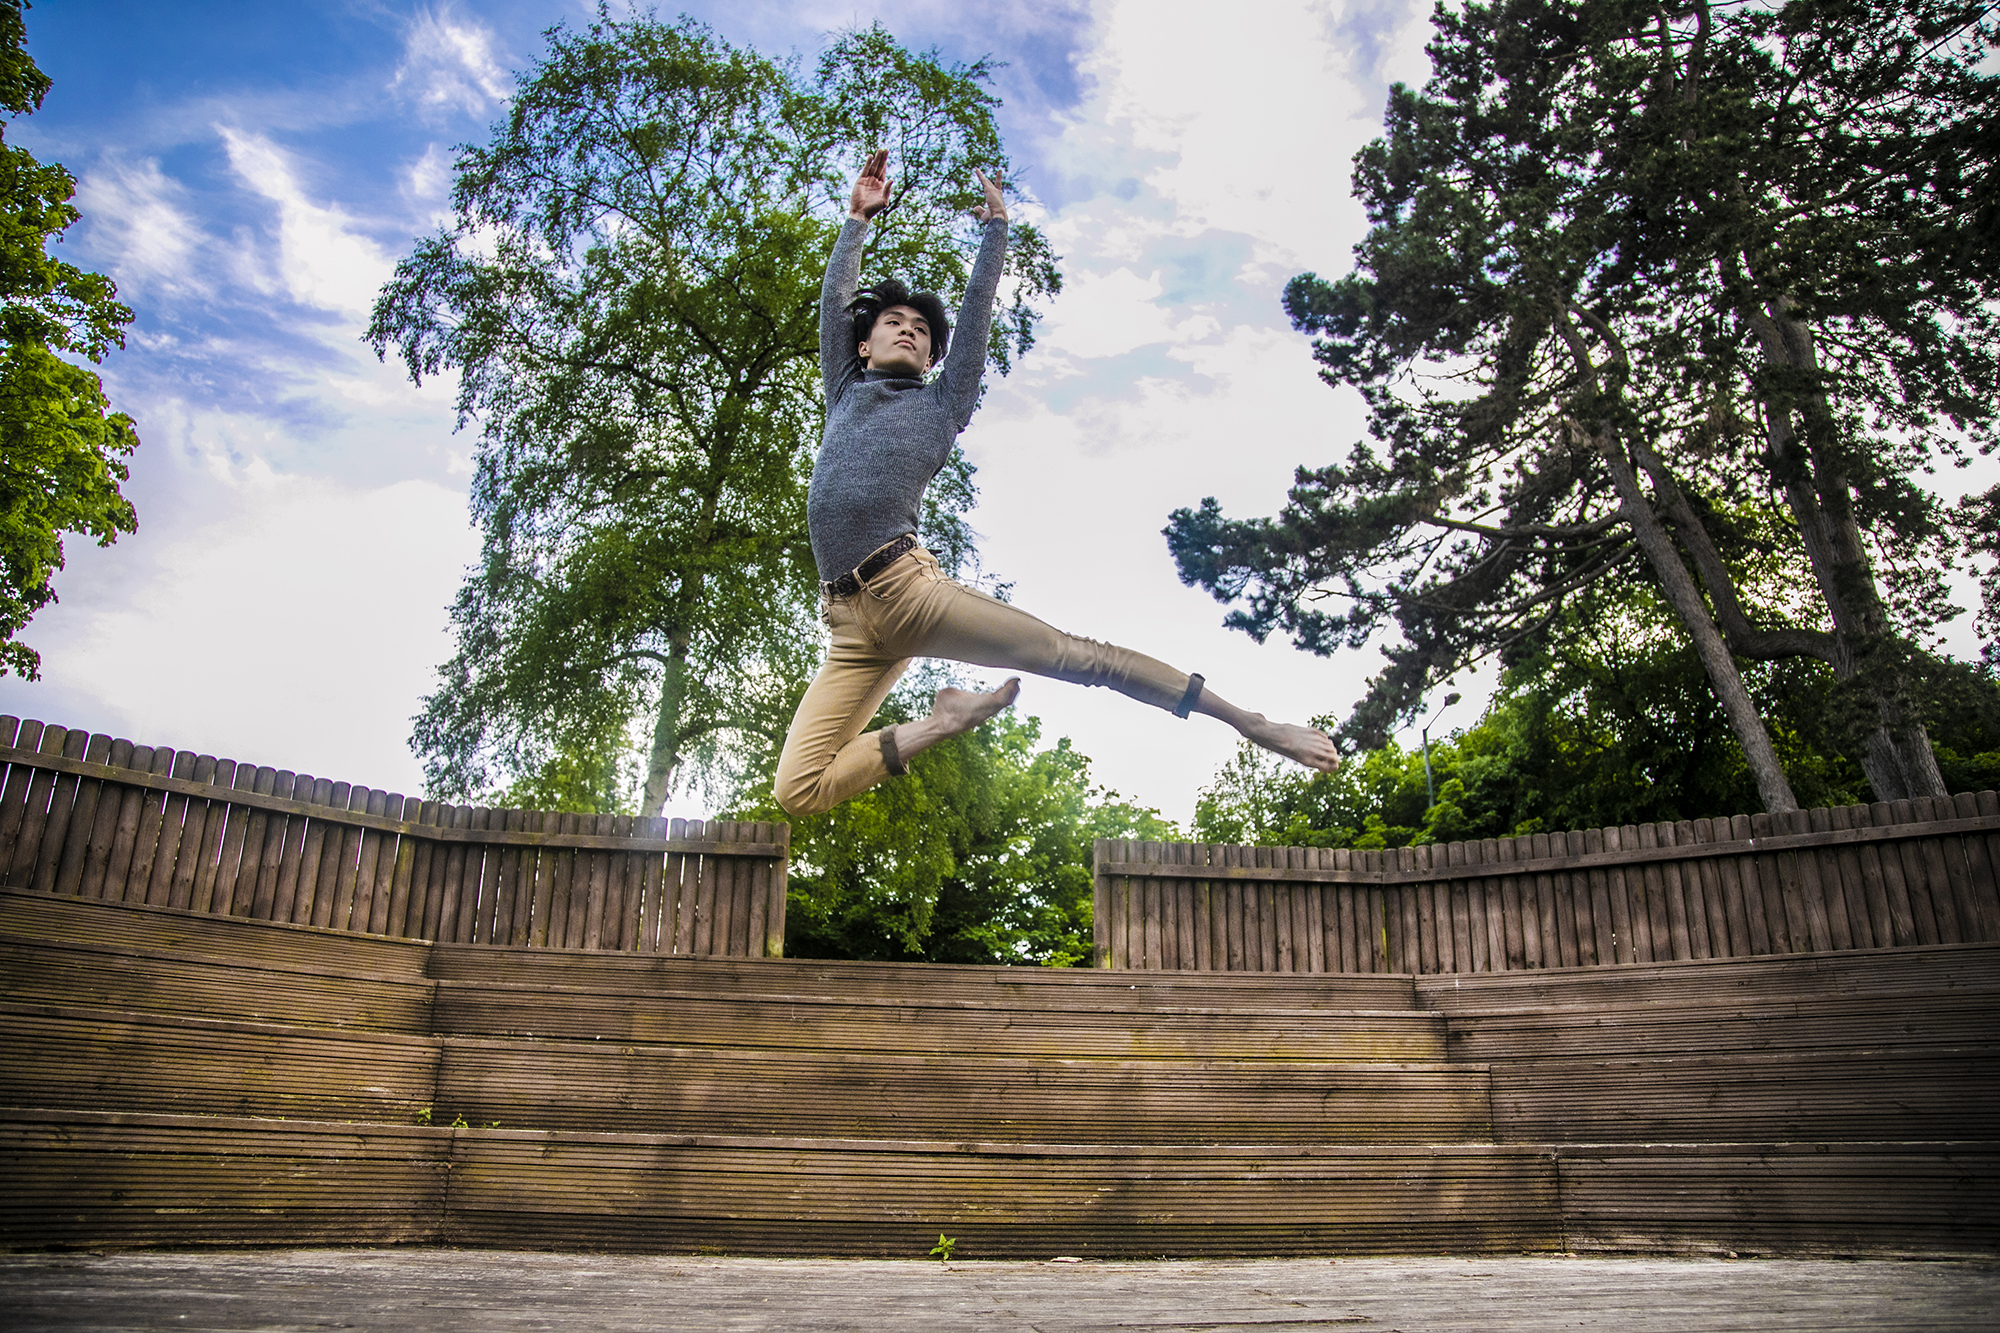 global majority male dancer jumping high with arms above head. Wearing grey long sleve tshirt and beige trousers.  In front of soft focus trees and blue sky.